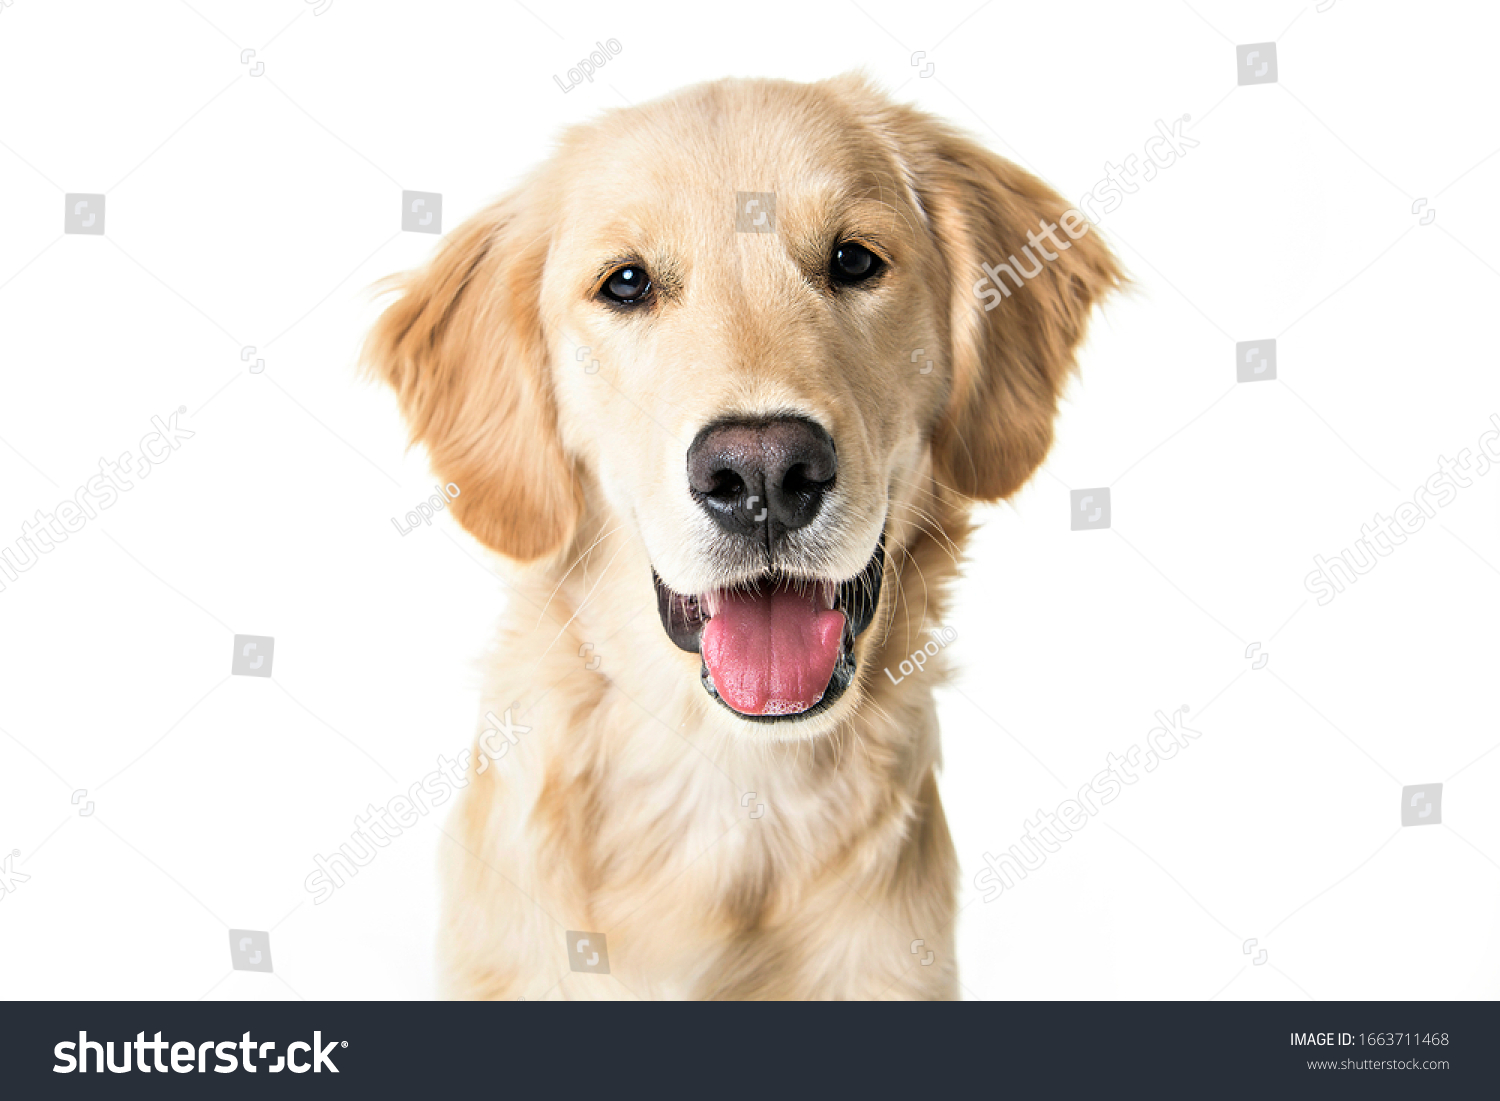 A young Golden Retriever Portrait isolated on white #1663711468